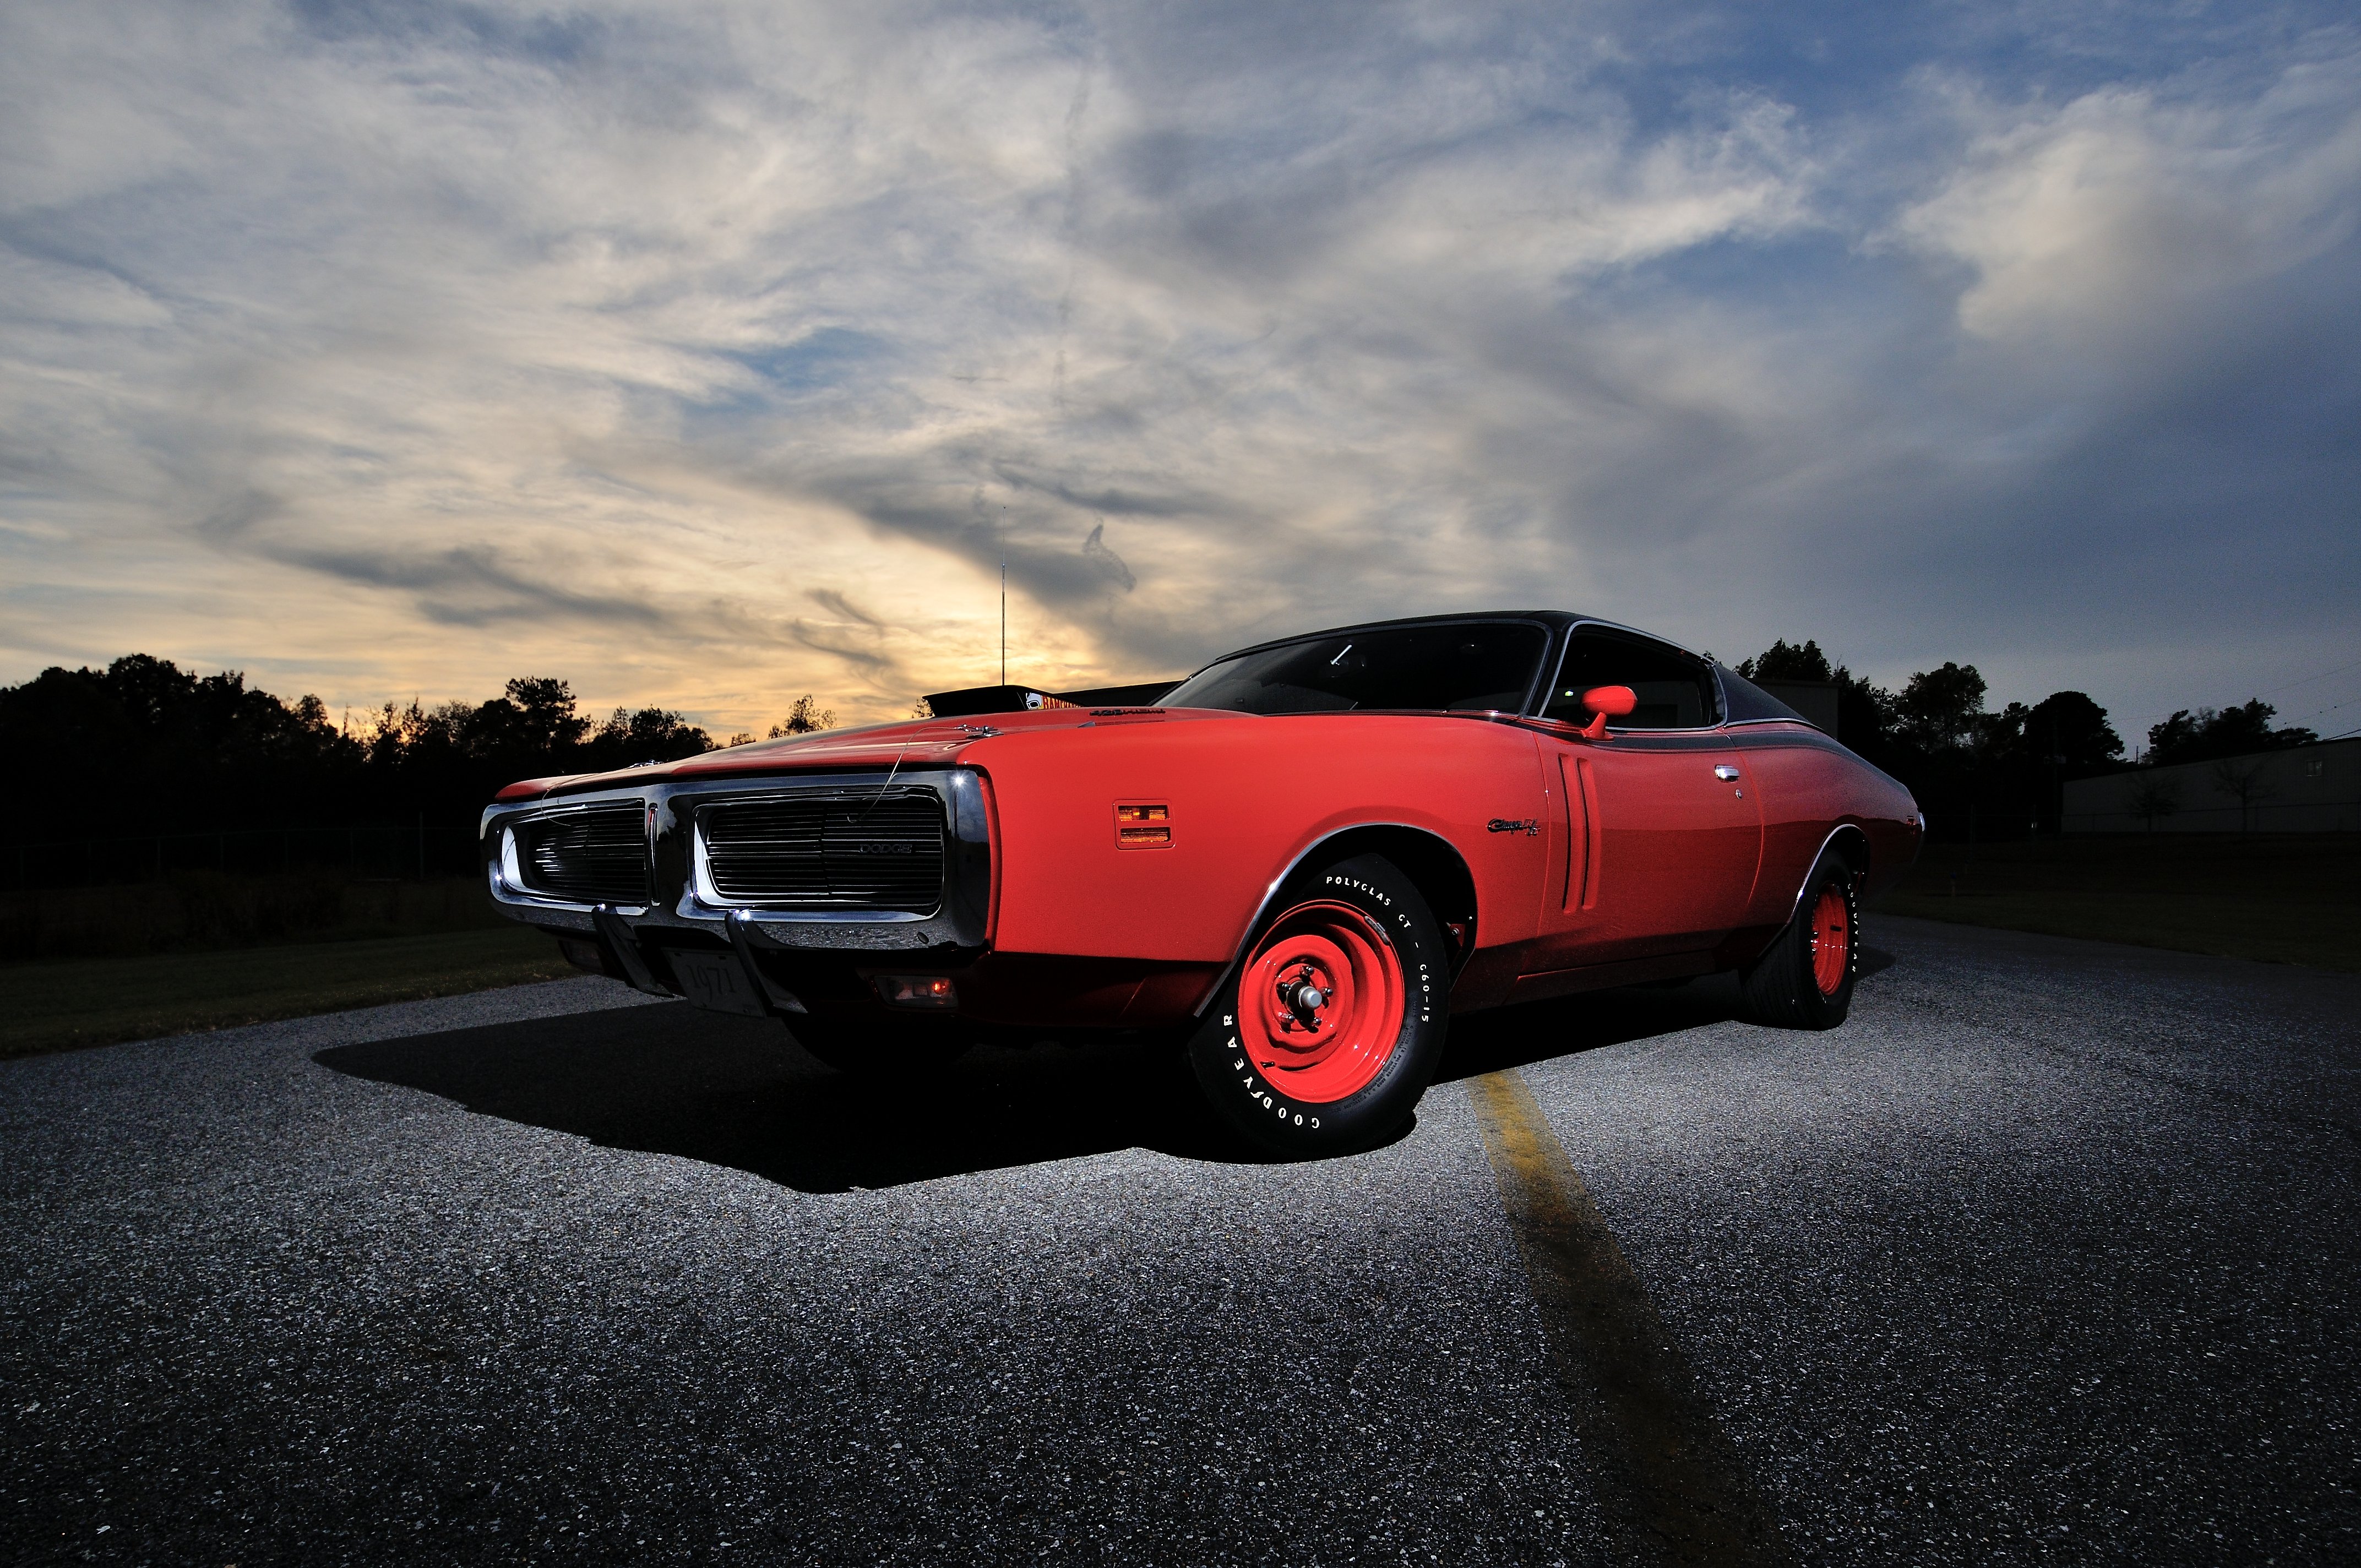 1971, Dodge, Hemi, Charger, Rt, Pilot, Car, Red, Muscle, Classic, Old, Usa, 4288x2848 09 Wallpaper